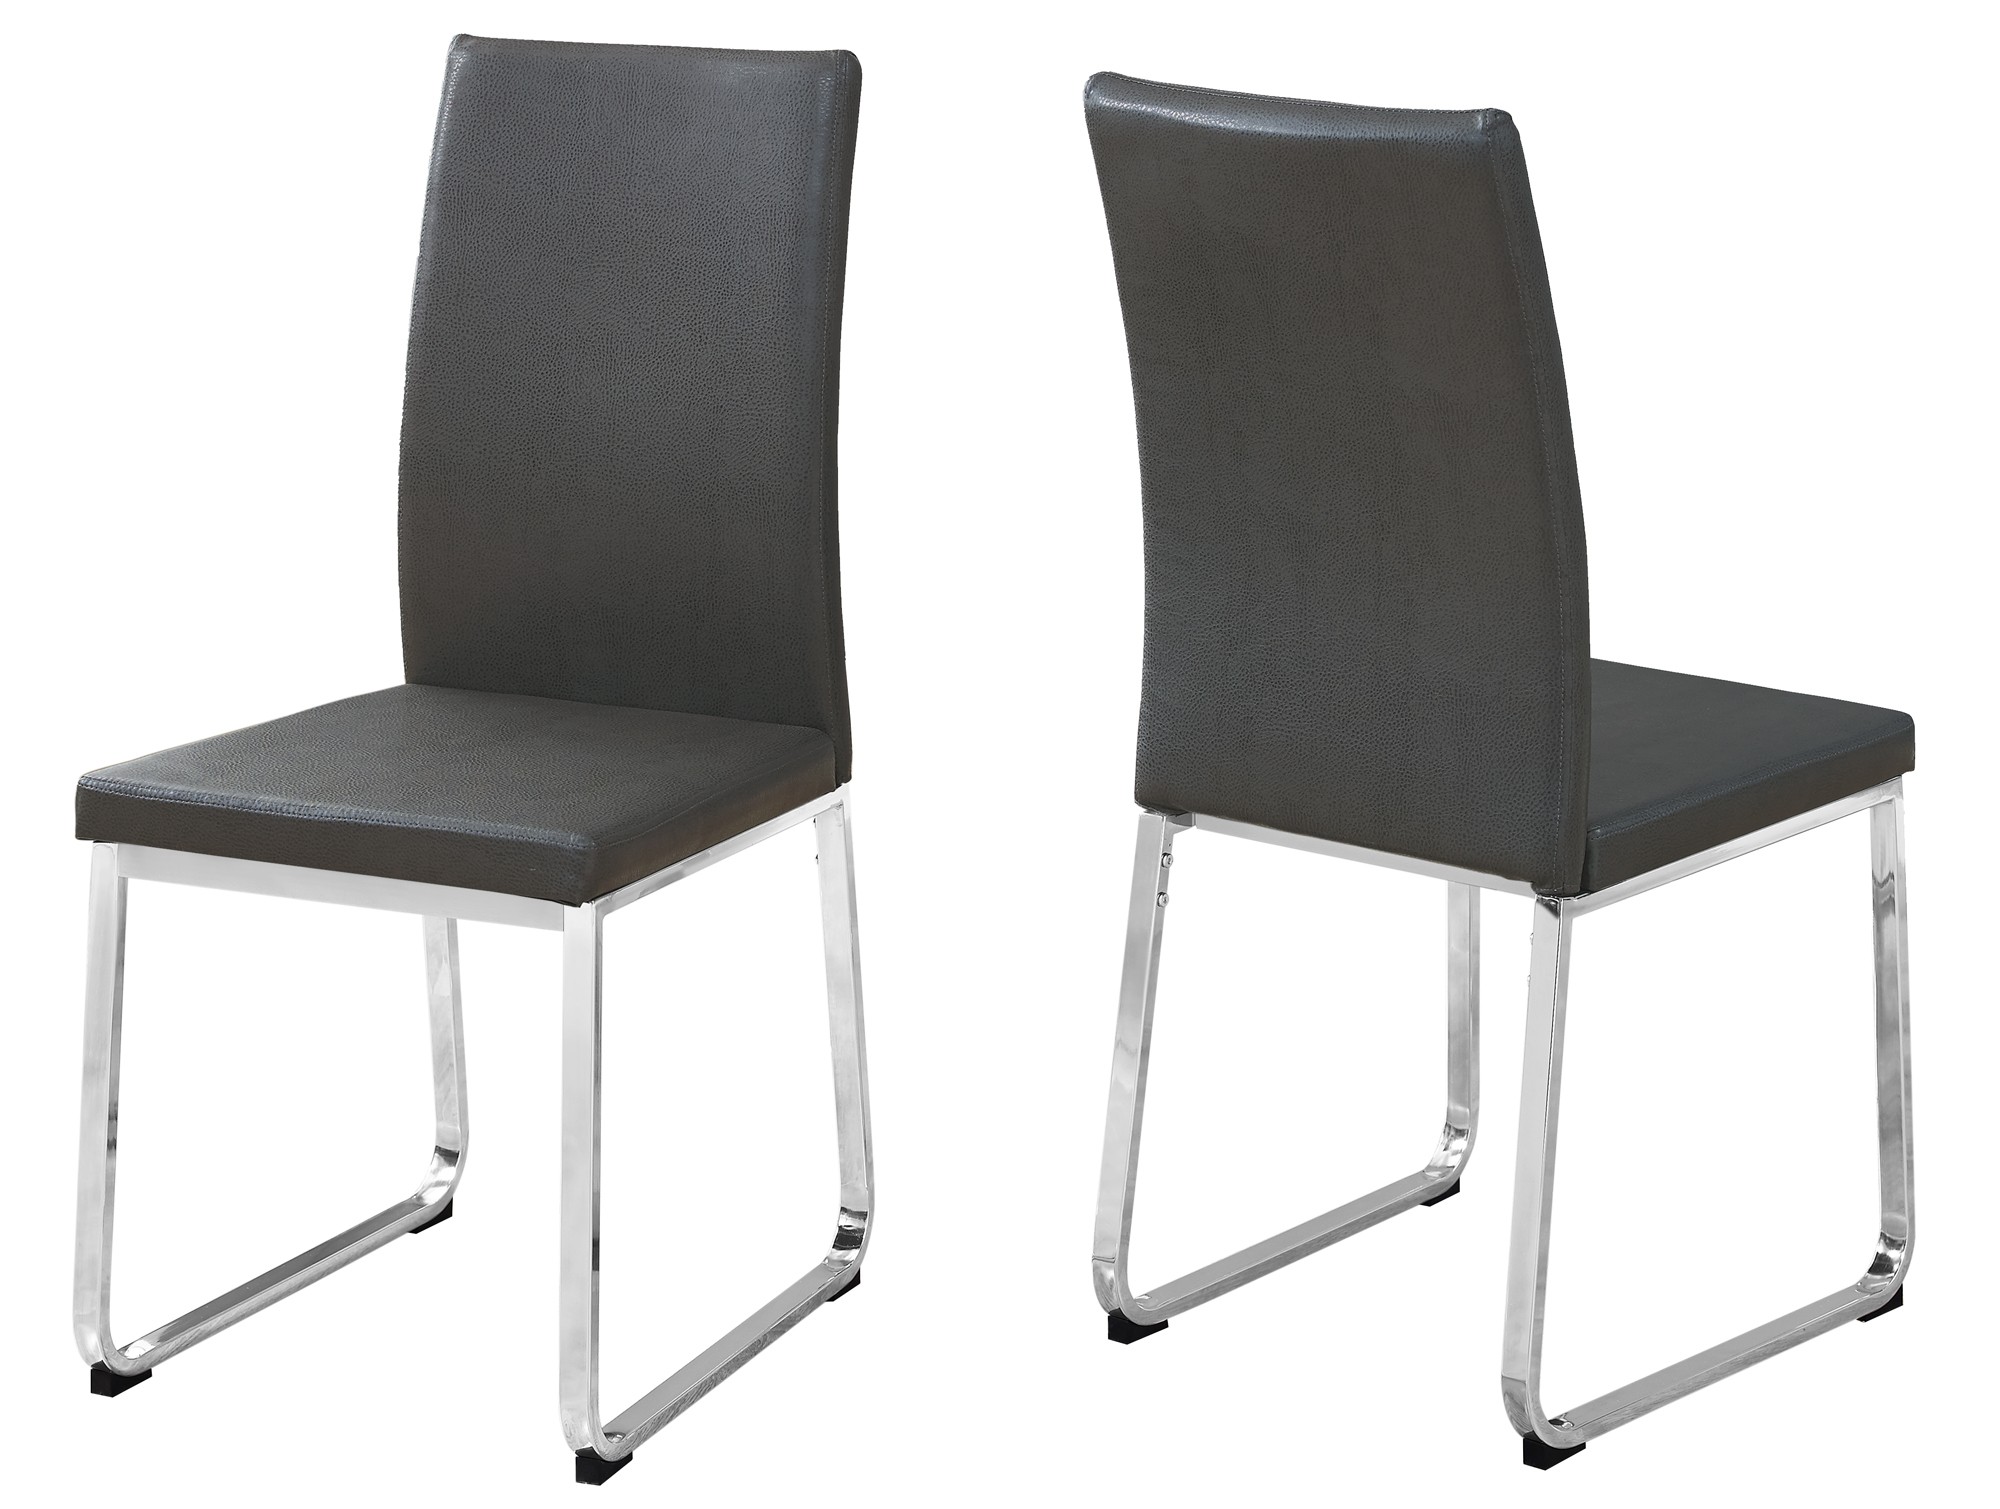 39.5" x 34" x 76" Grey Foam Metal Leather Look Dining Chairs 2pcs